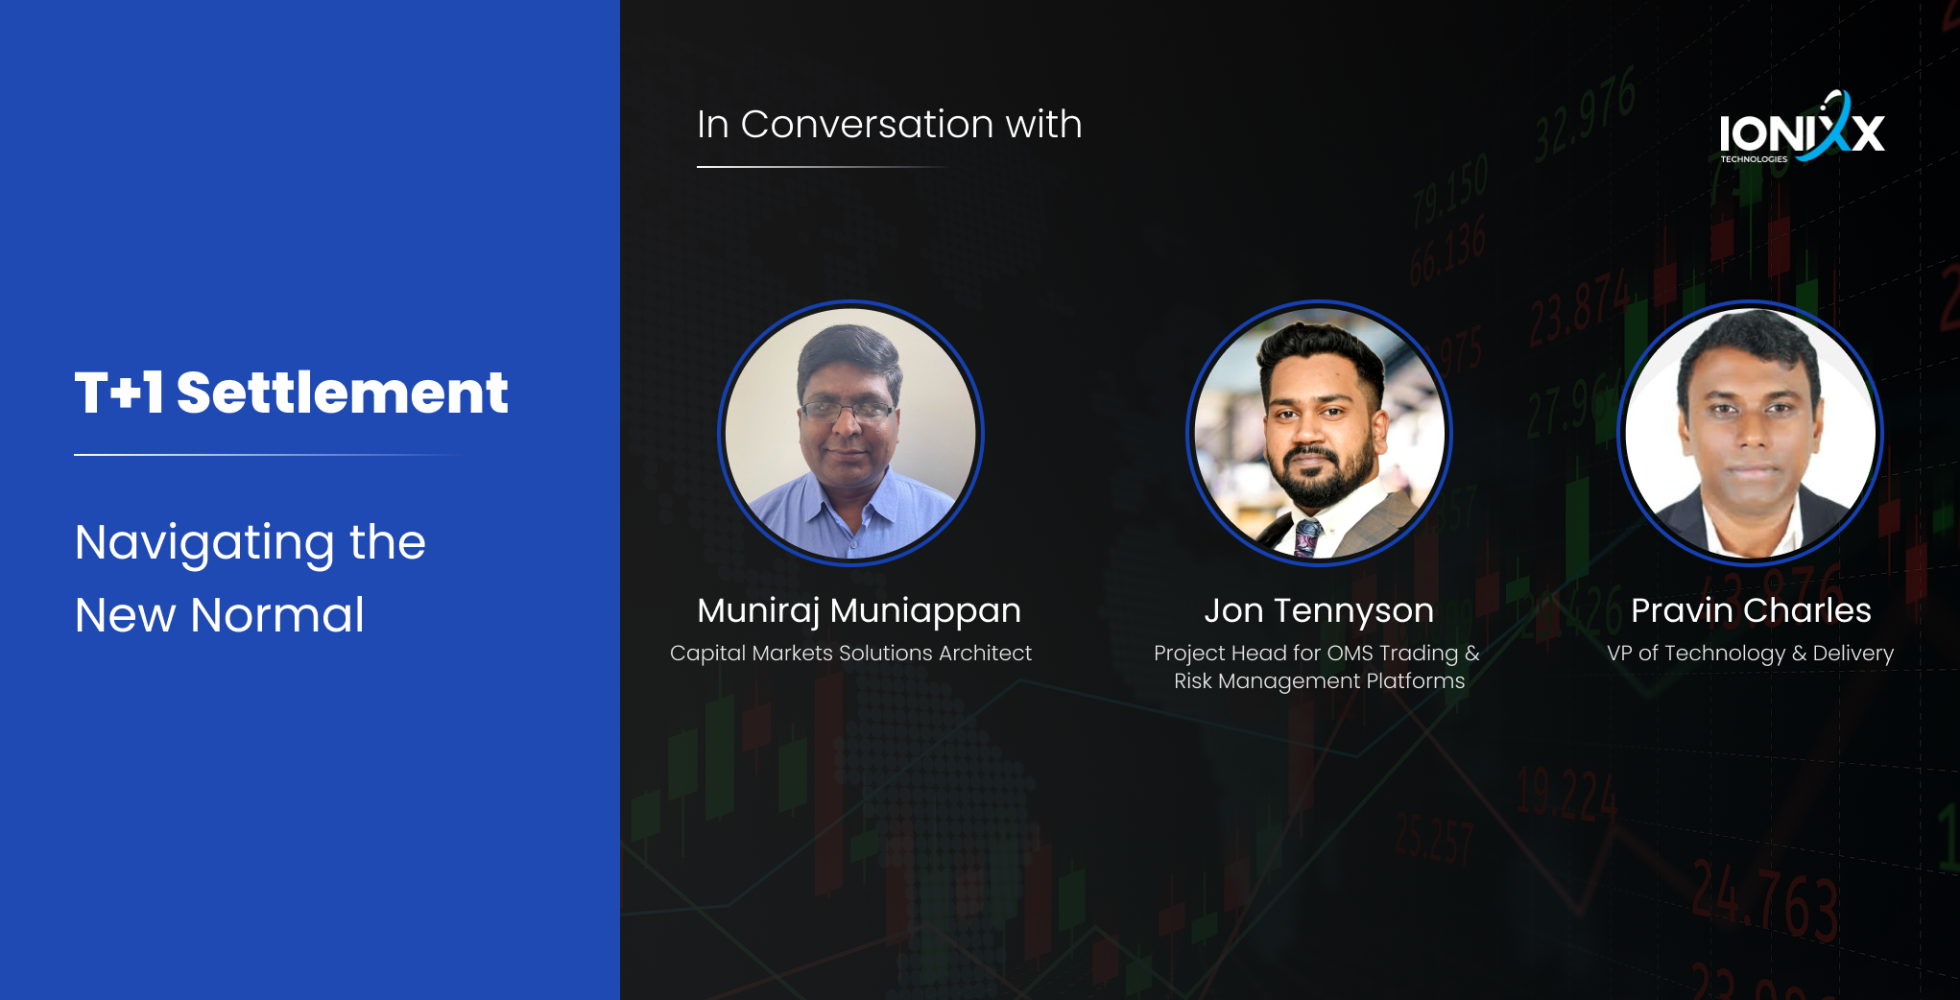 Alt text: "Promotional graphic for a discussion on T+1 Settlement titled 'Navigating the New Normal' featuring three speakers. From left to right: Muniraj Muniappan, a Capital Markets Solutions Architect; Jon Tennyson, Project Head for OMS Trading & Risk Management Platforms; and Pravin Charles, VP of Technology & Delivery. The backdrop includes a dark blue theme with stock market figures and trends visible, highlighting the financial context of the conversation. The logo for IONIXX Technologies is present in the top right corner.